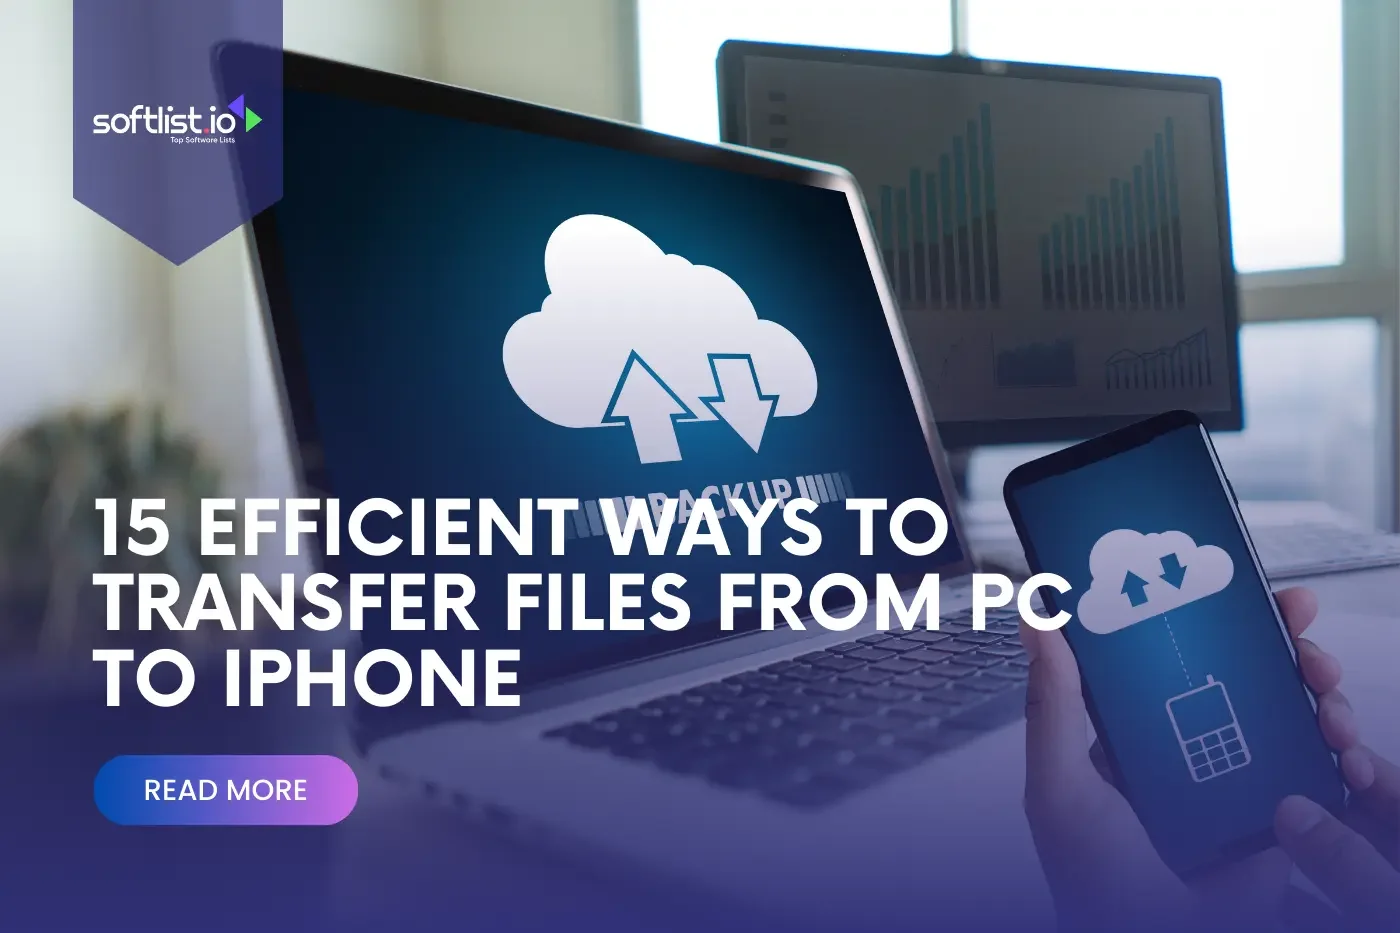 15 Efficient Ways to Transfer Files from PC to iPhone